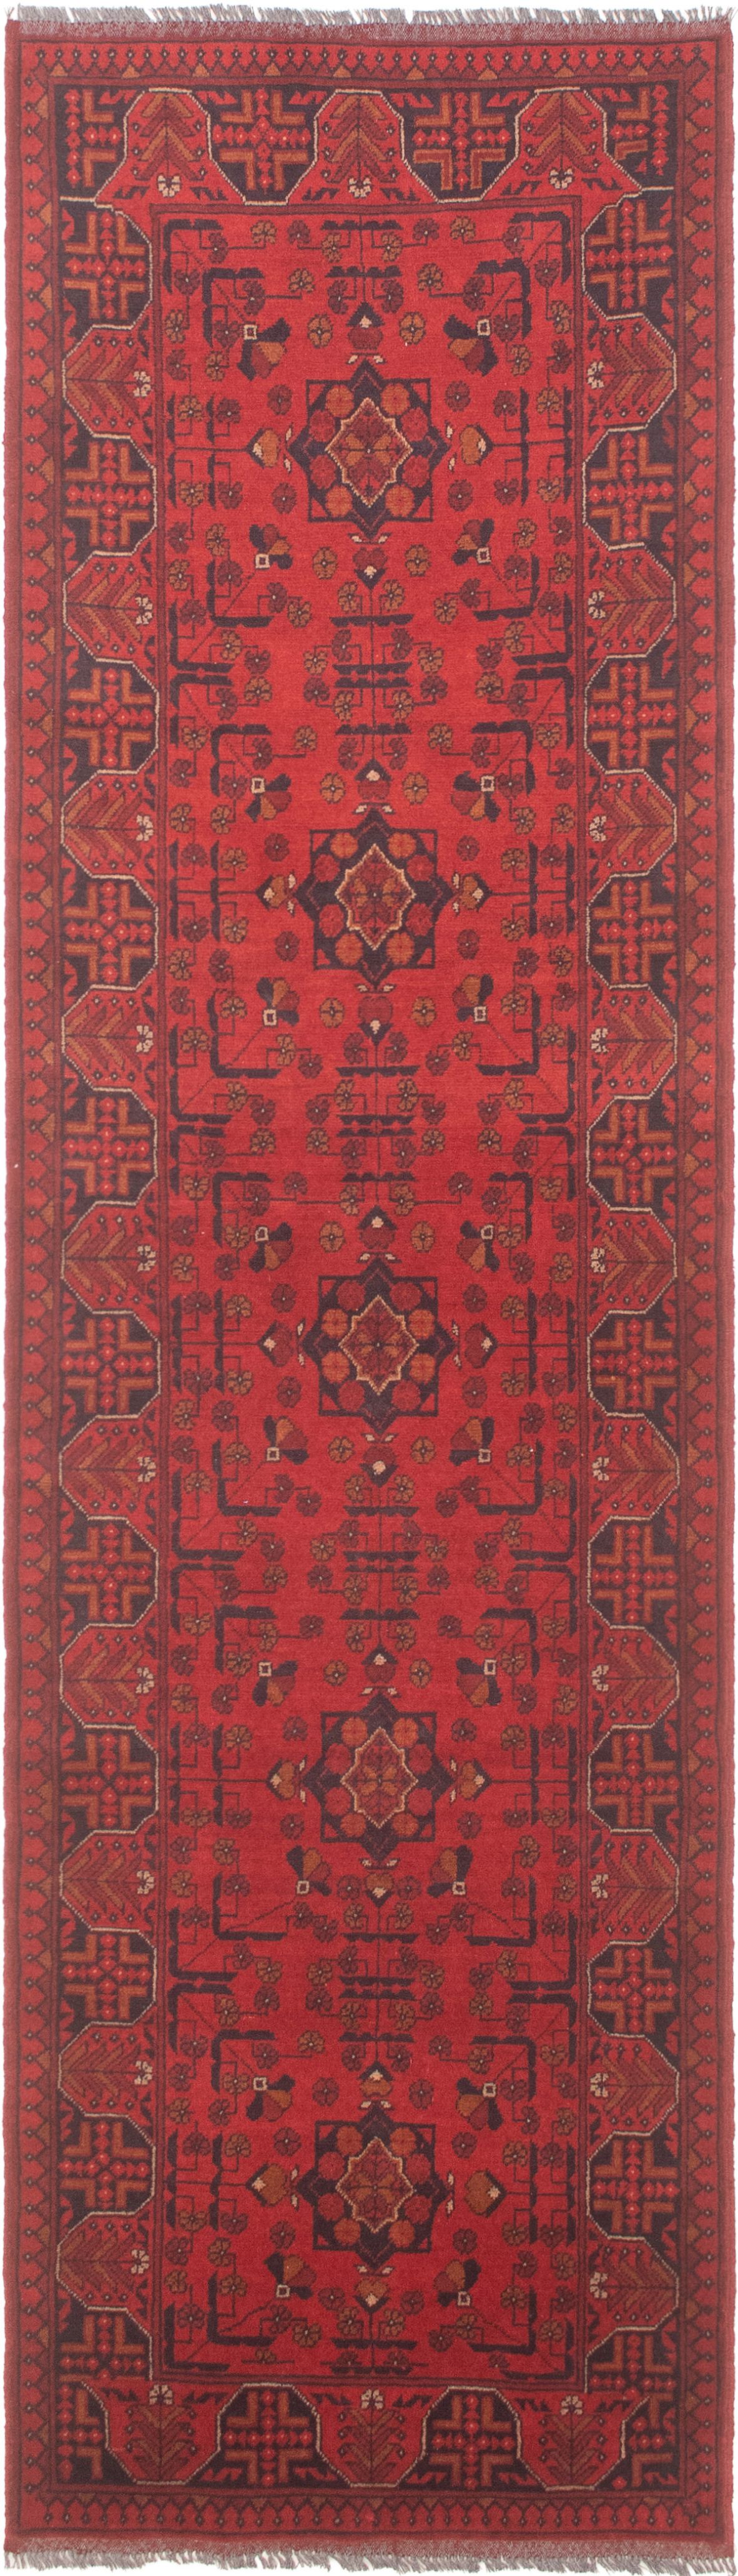 Hand-knotted Finest Khal Mohammadi Red Wool Rug 2'7" x 9'6" (21) Size: 2'7" x 9'6"  